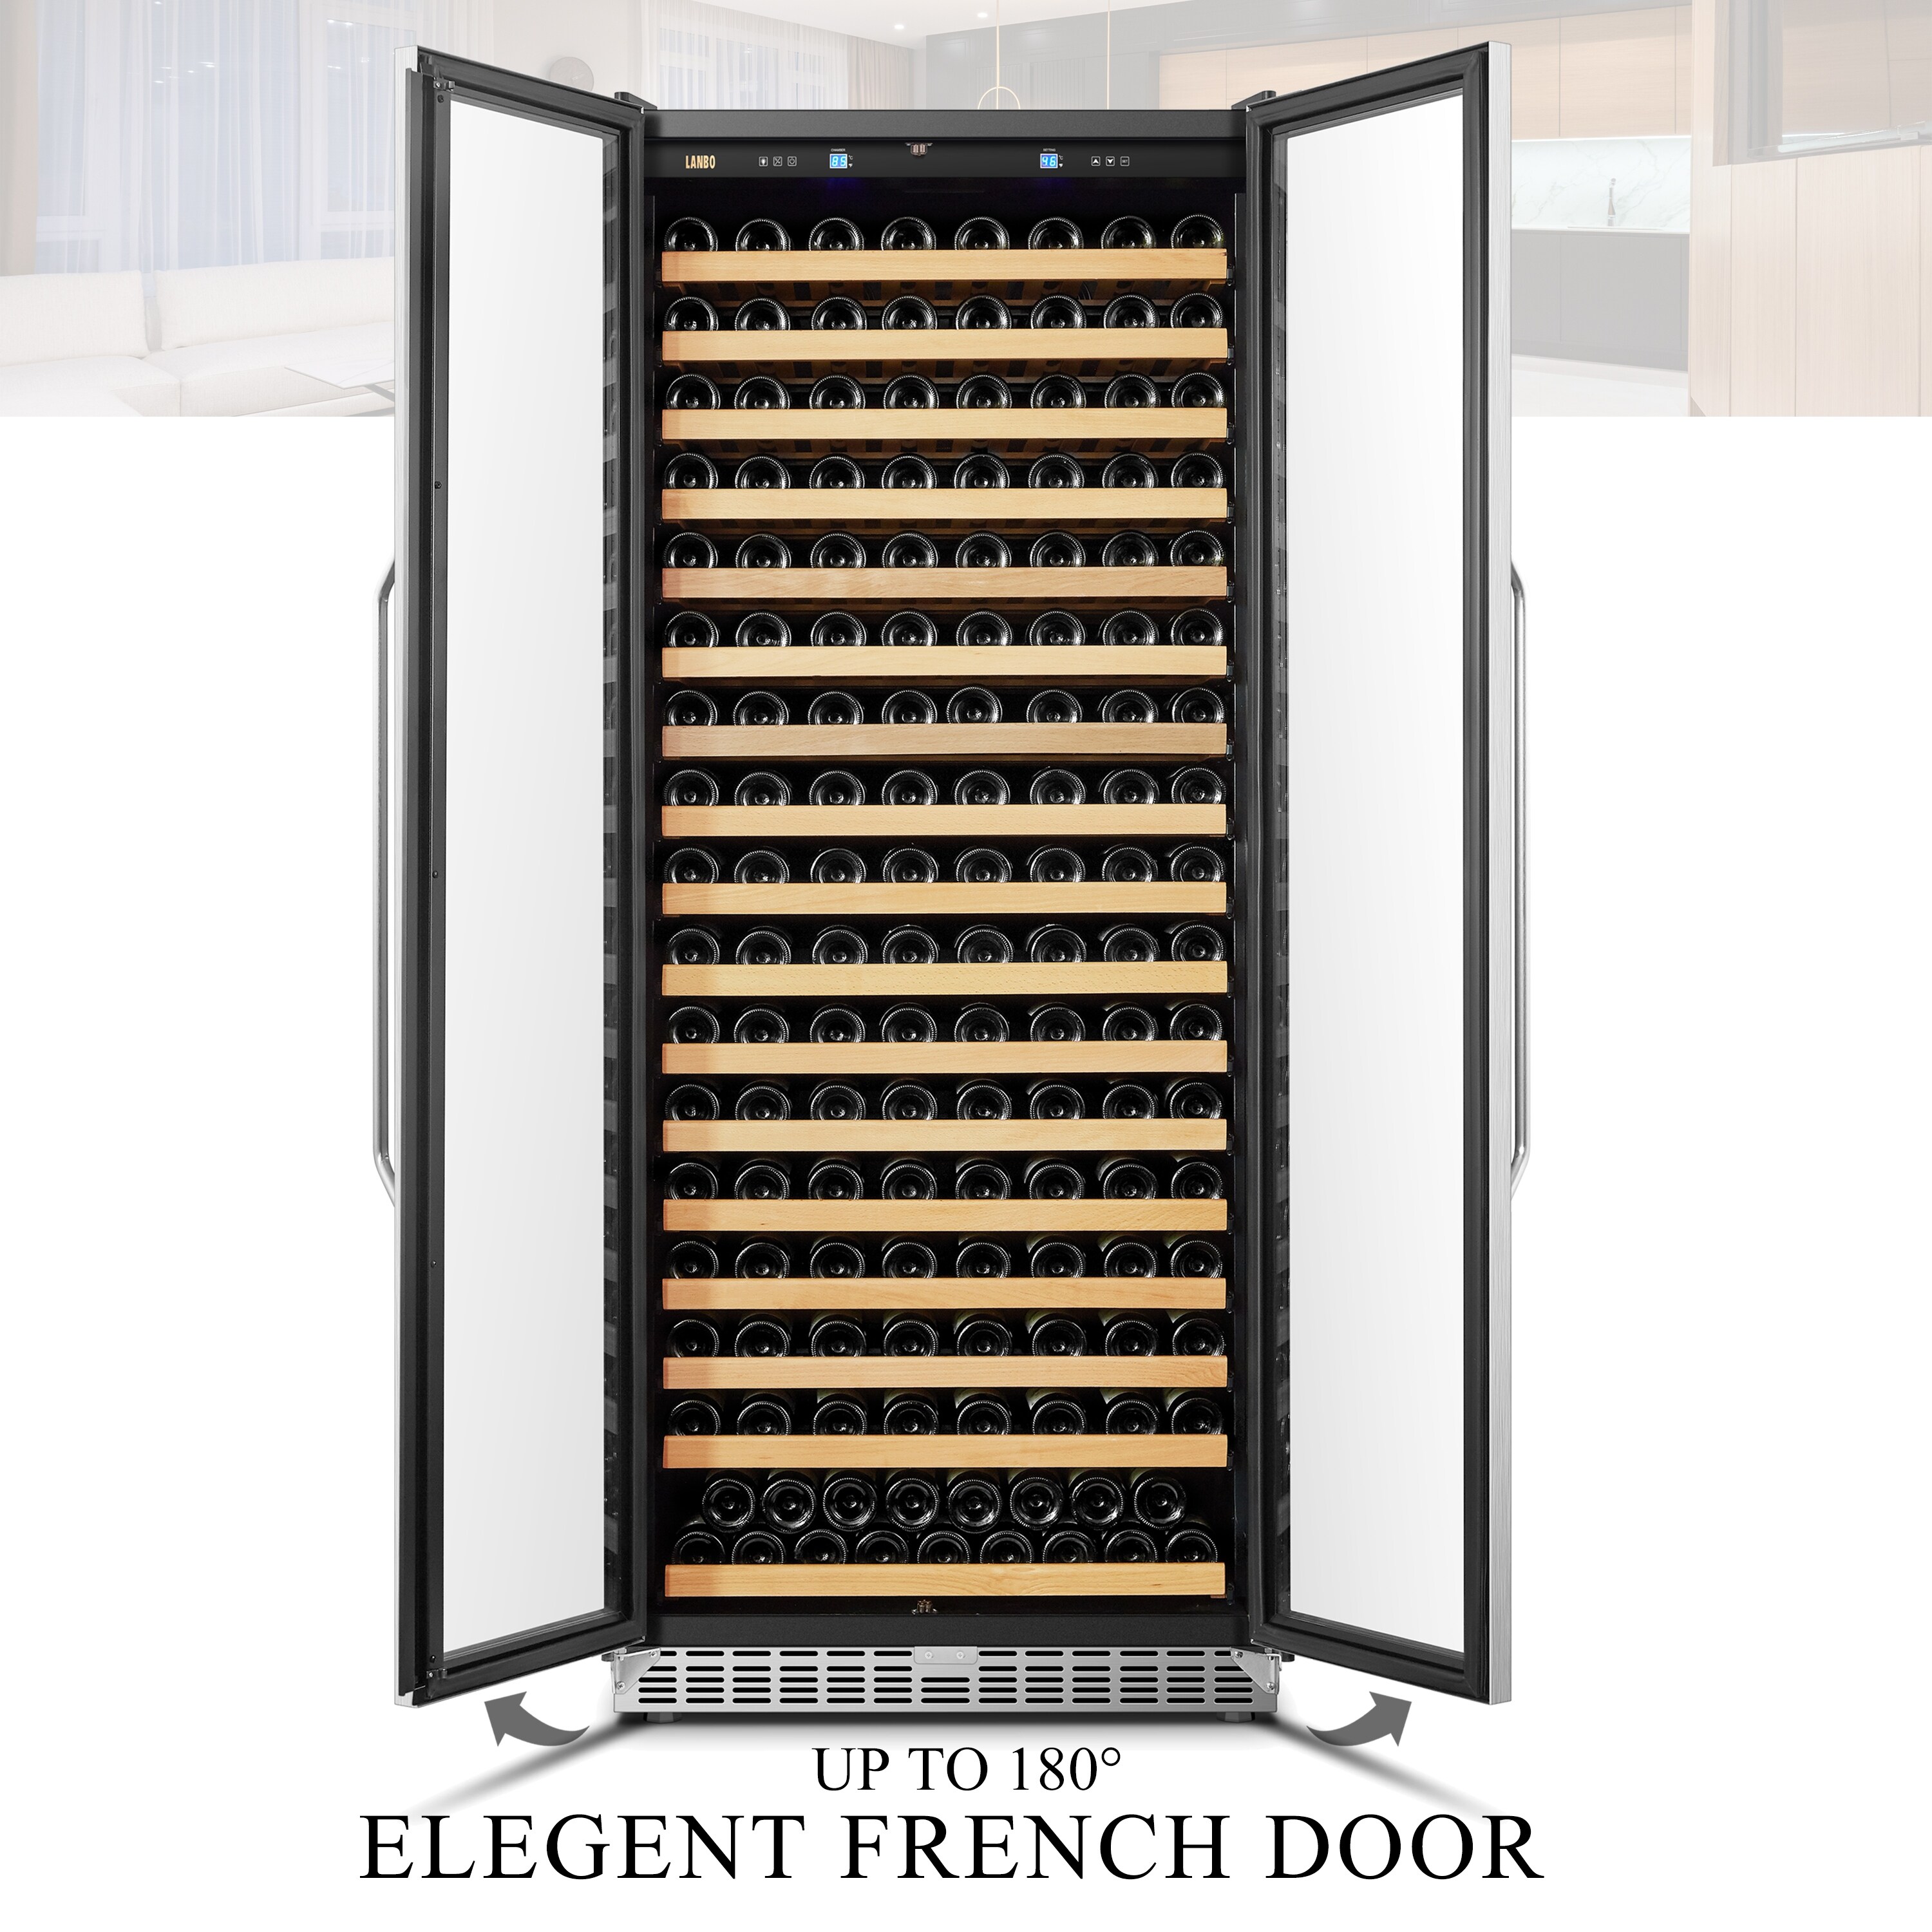 NewAir 15 inch Wine and Beverage Refrigerator - 13 Bottles & 48 Cans Capacity with Dual Temperature Zones, Black Stainless Steel